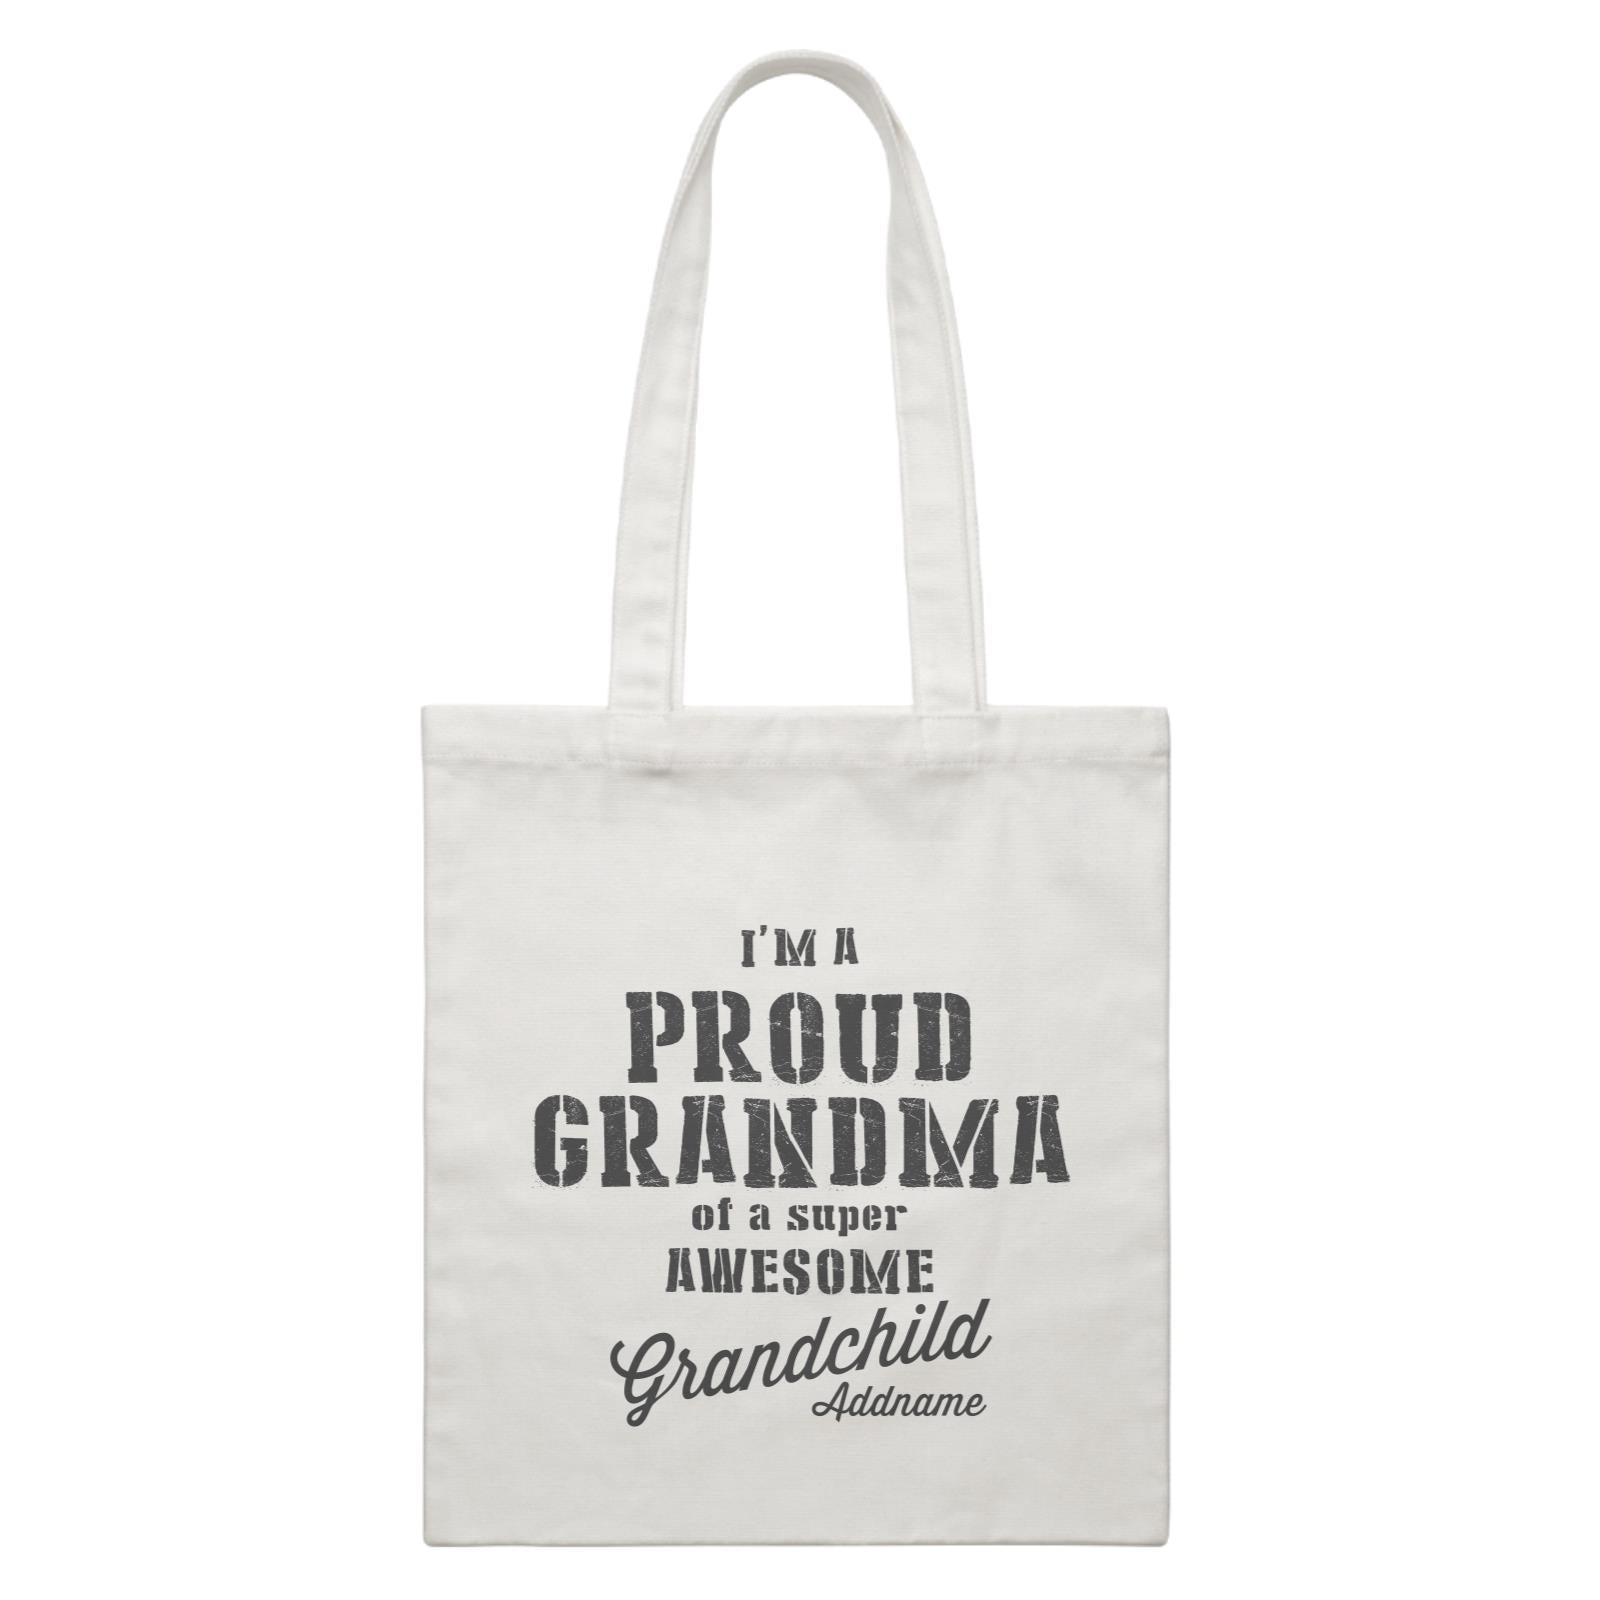 Proud Family Im A Proud Grandma Of A Super Awesome Grandchild Addname White Canvas Bag